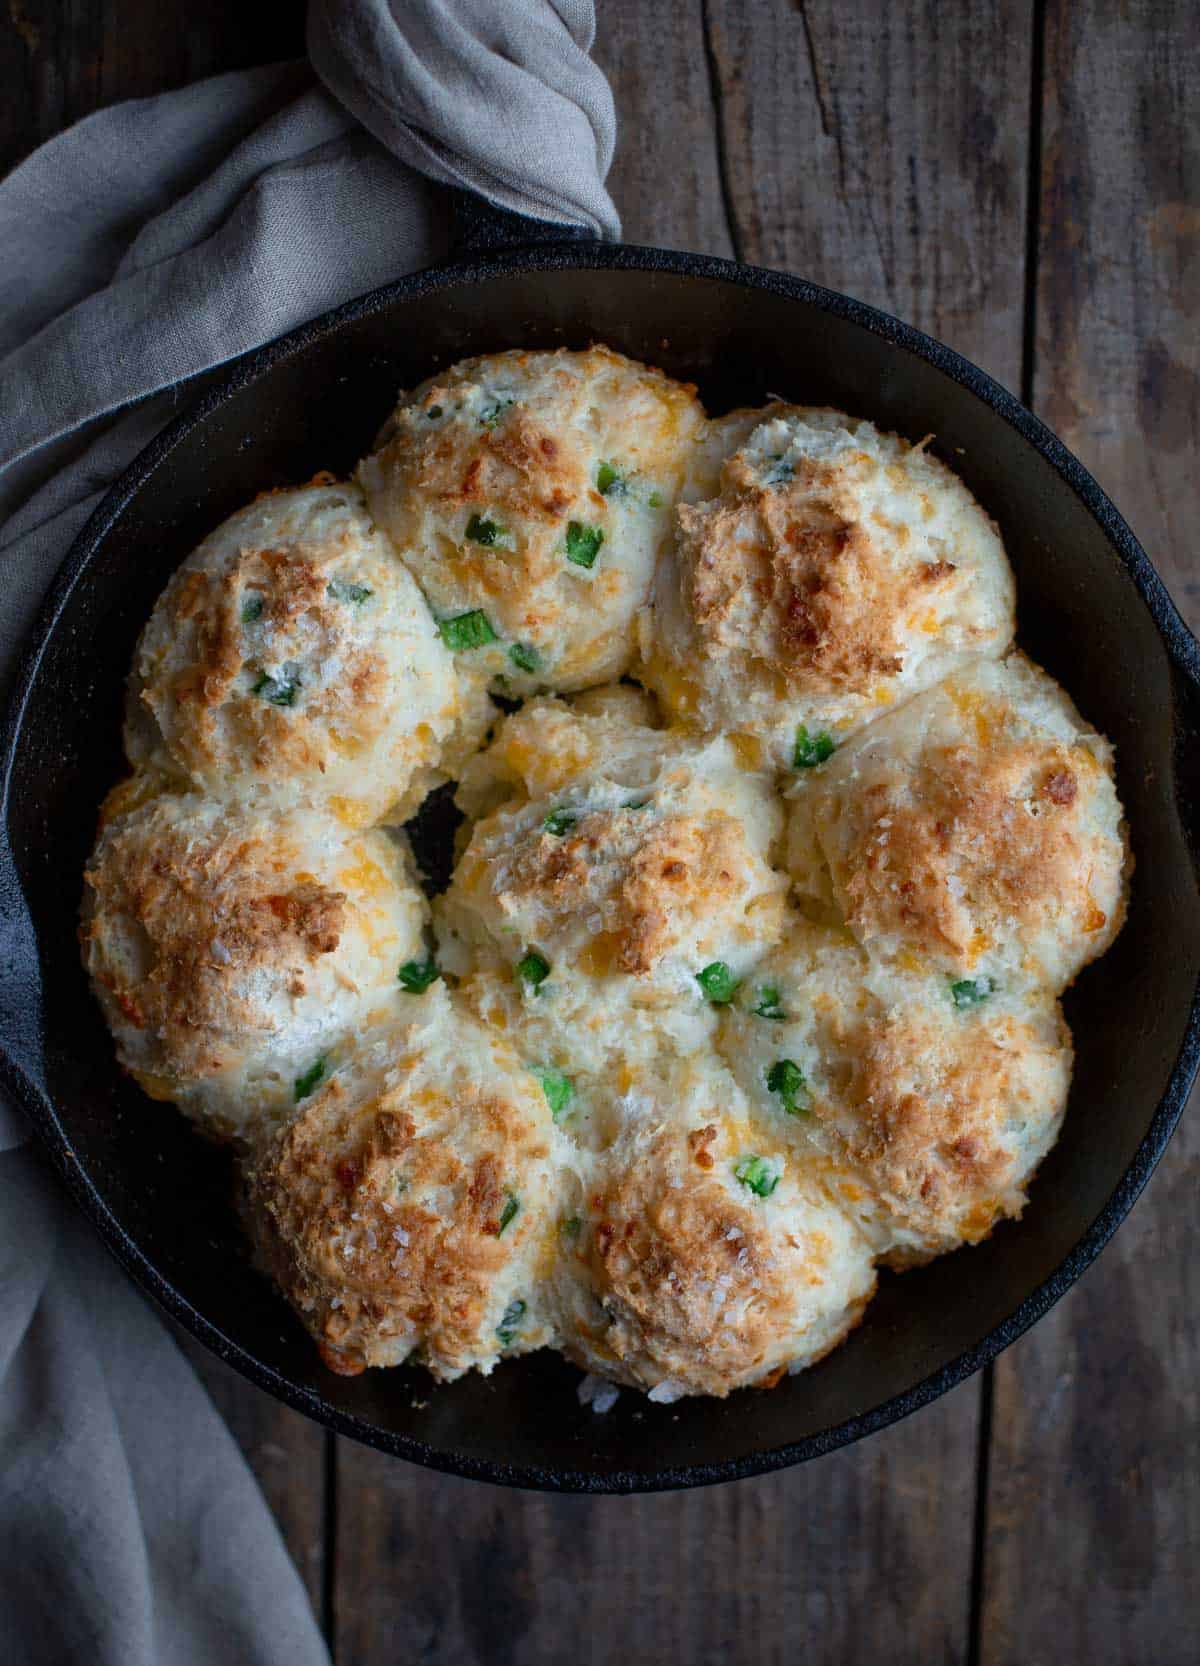 Cheddar and jalapeño gluten-free drop biscuits in cast iron.